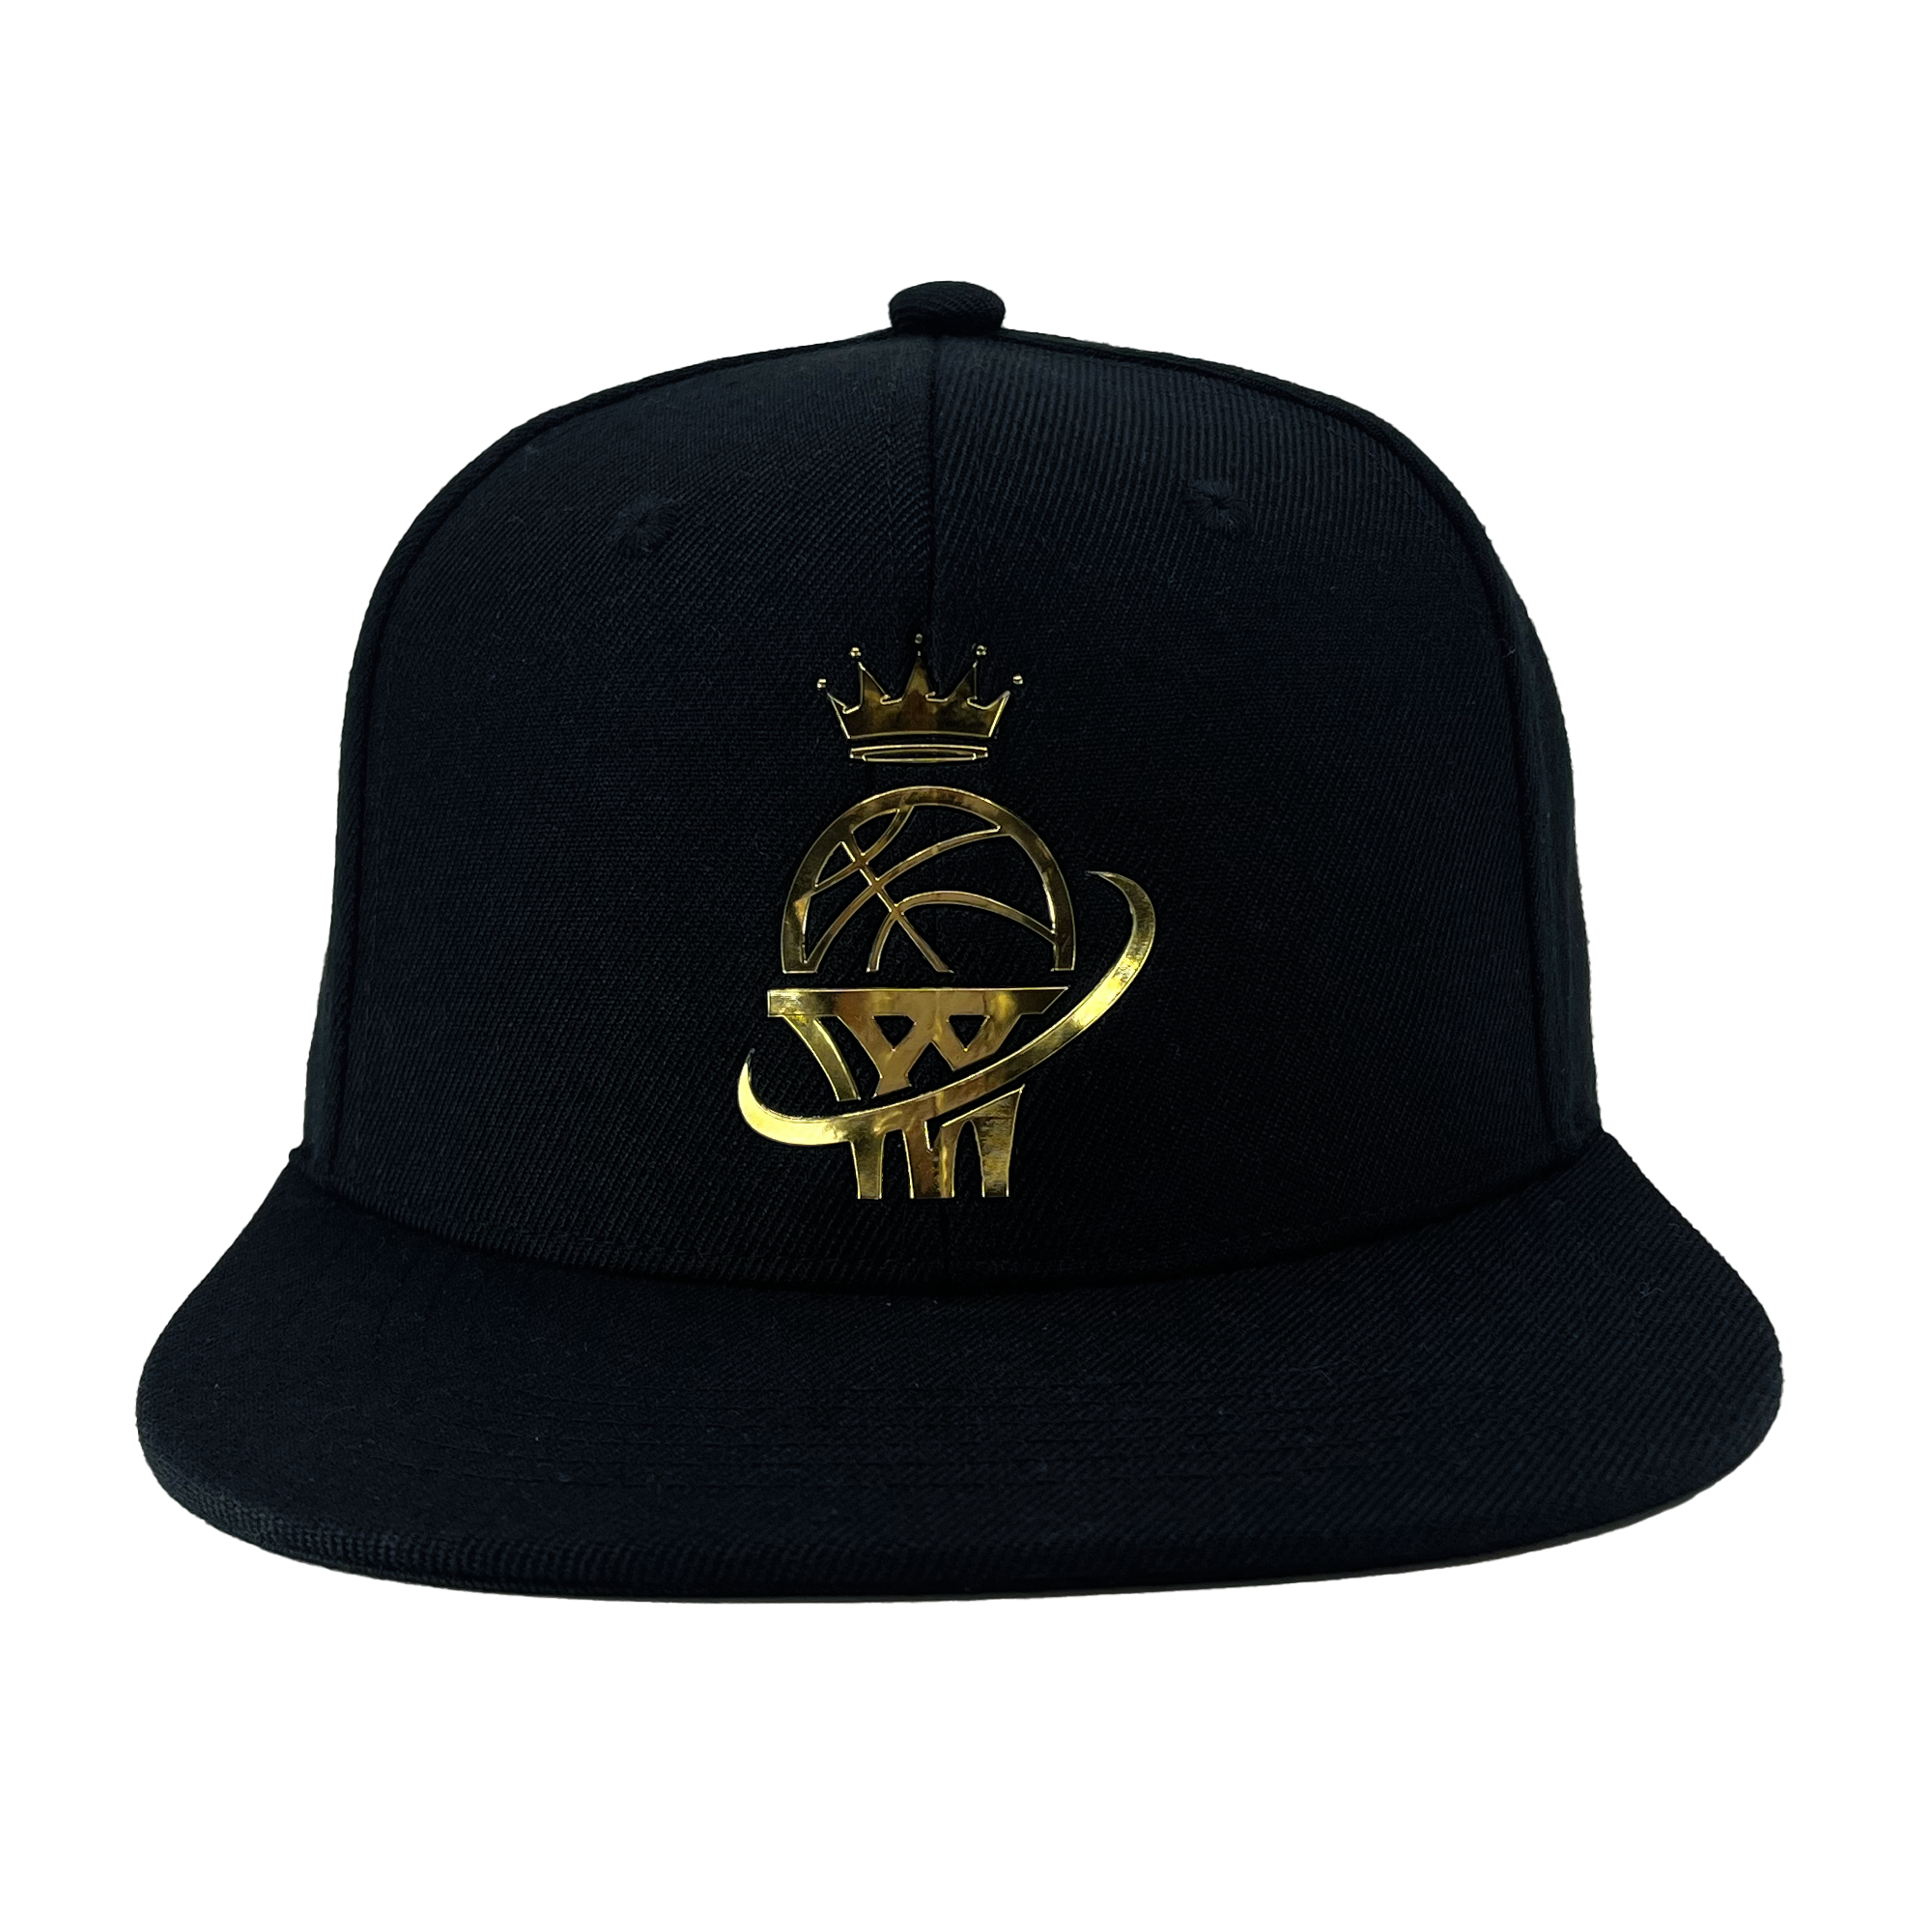 Front view of a black snapback hat with gold WPBA logo on the front crown.